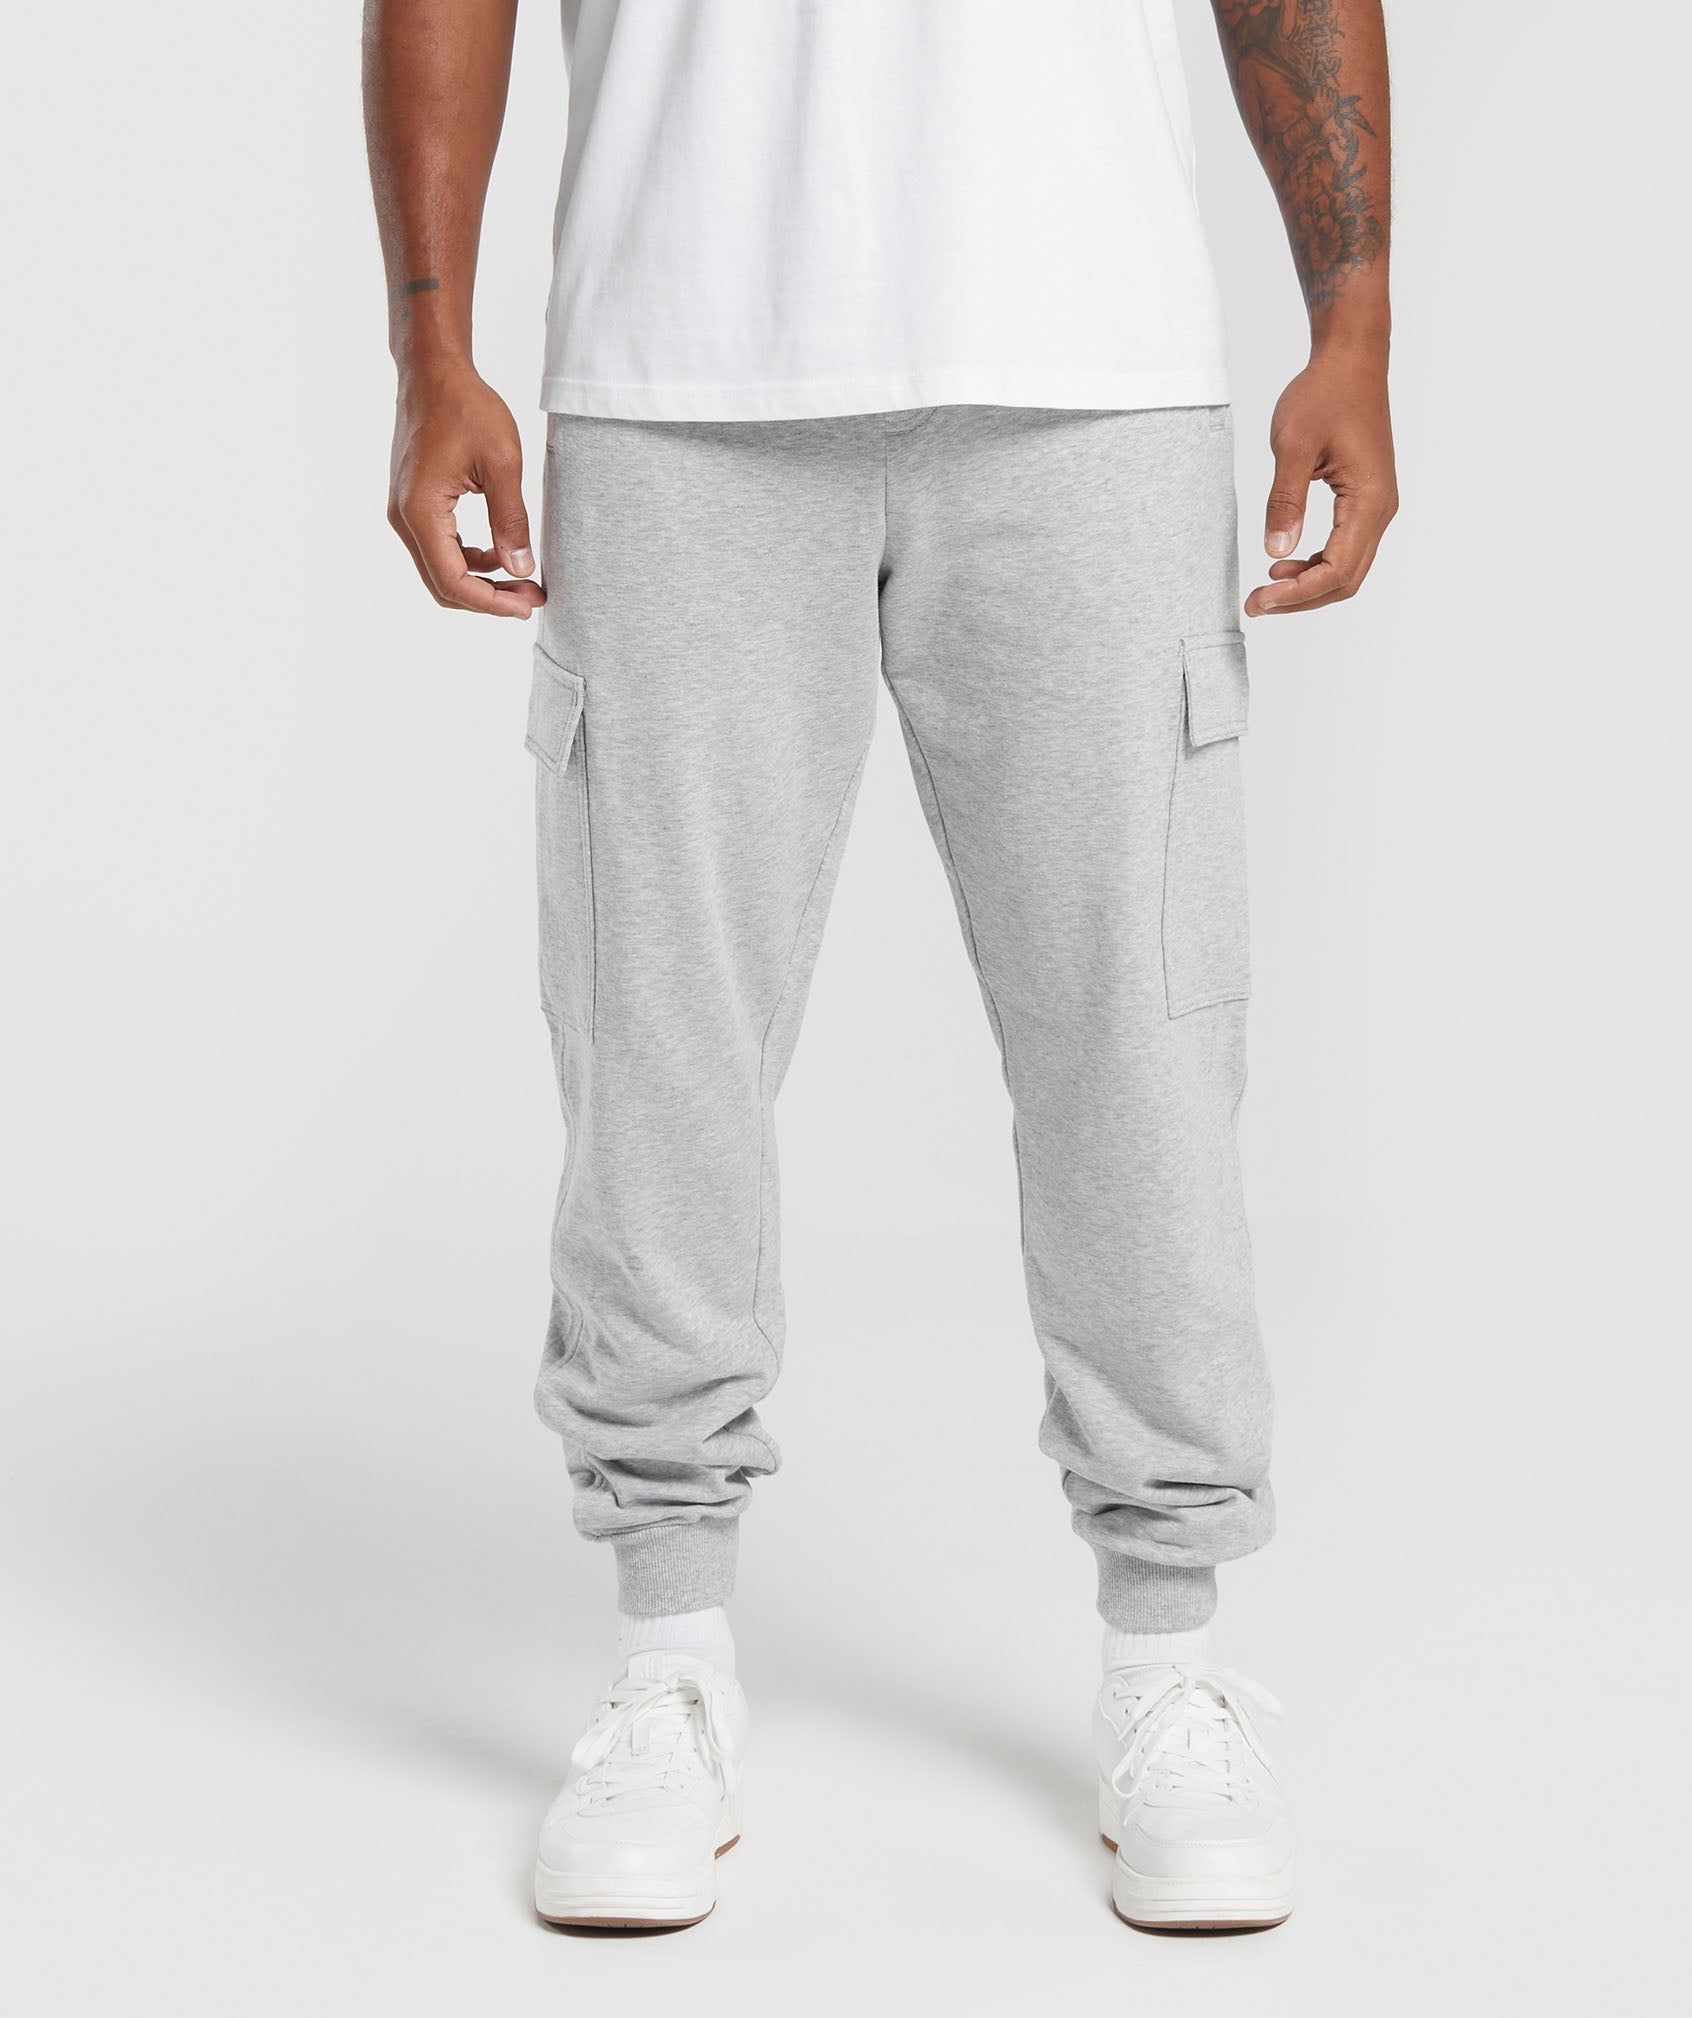 Rest Day Essentials Cargo Joggers in Light Grey Core Marl